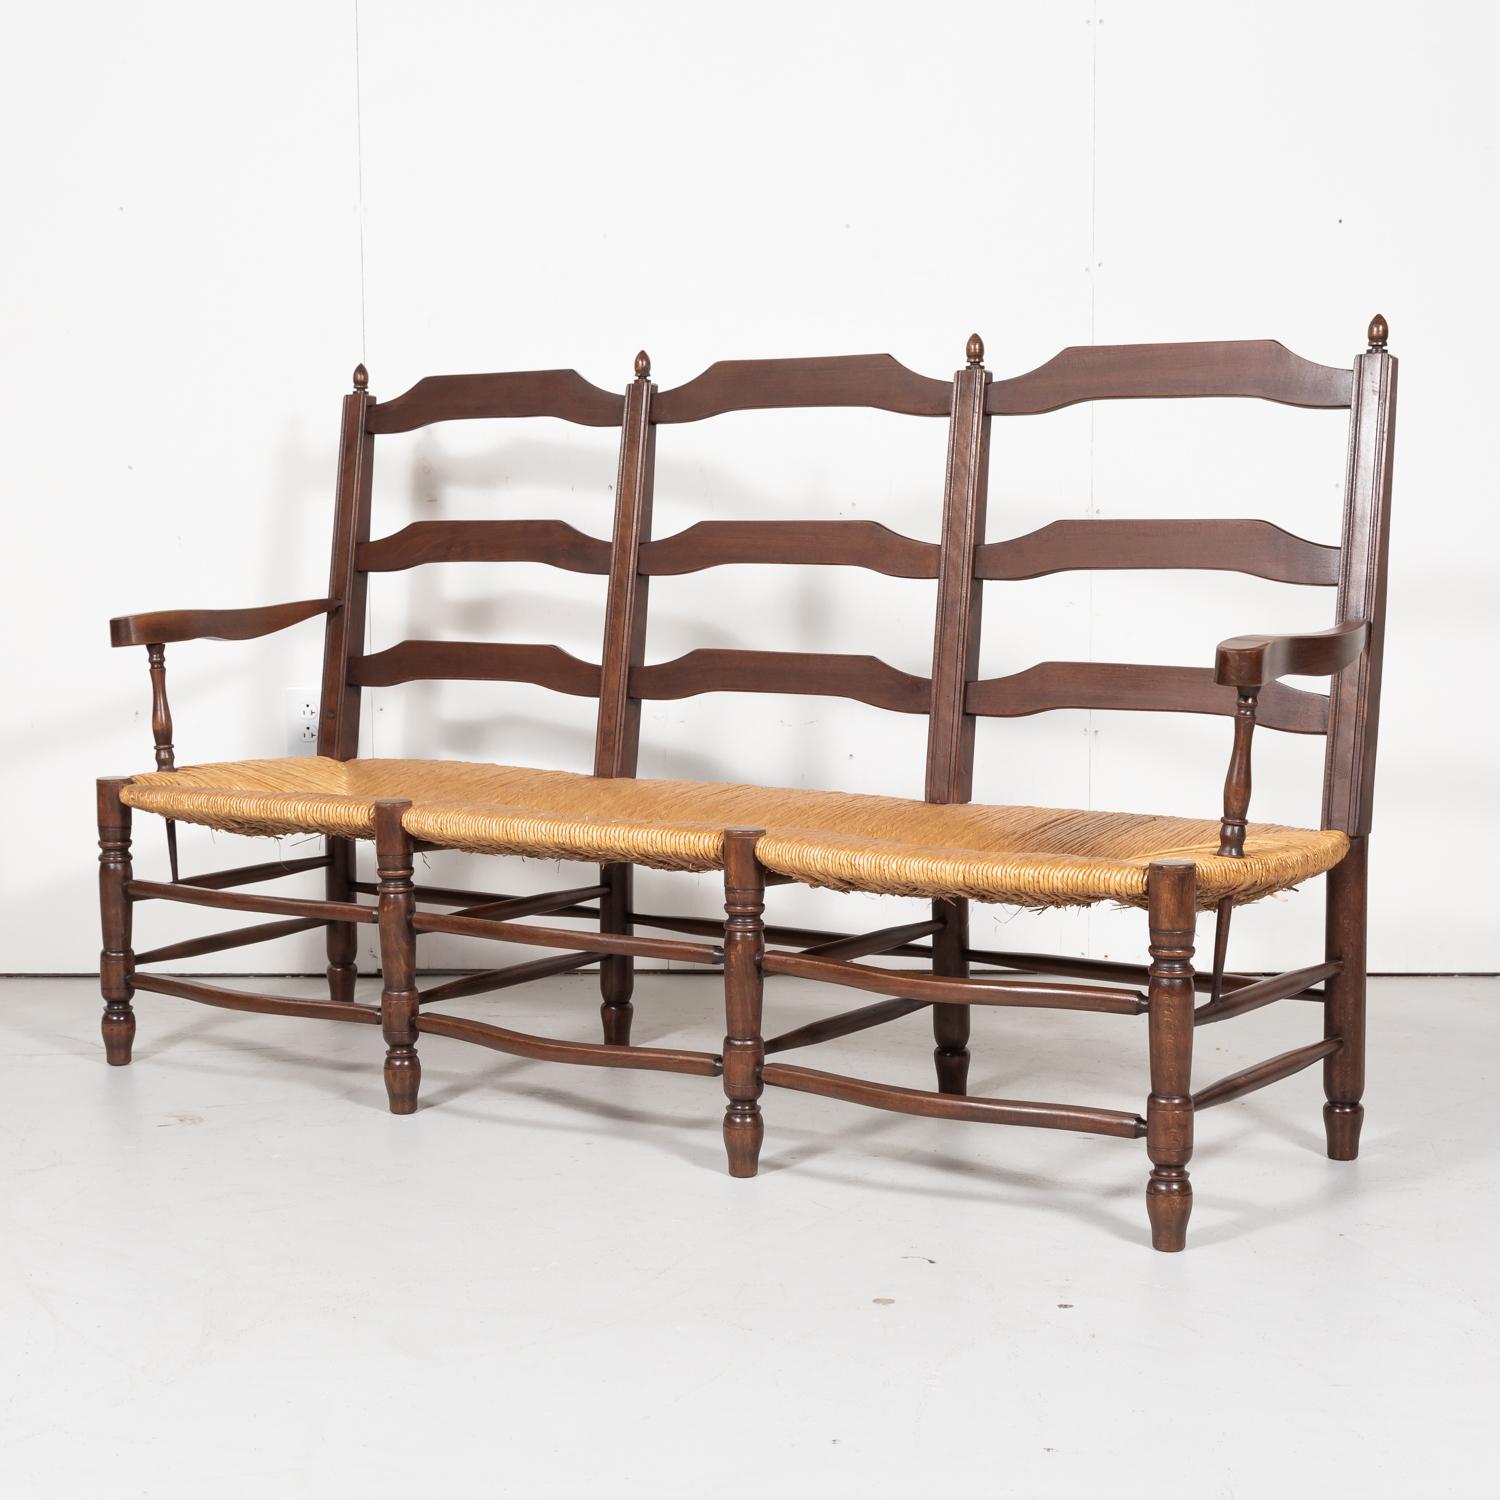 Mid-20th Century Country French Ladder-Back Walnut Settee or Radassier with Rush Seat